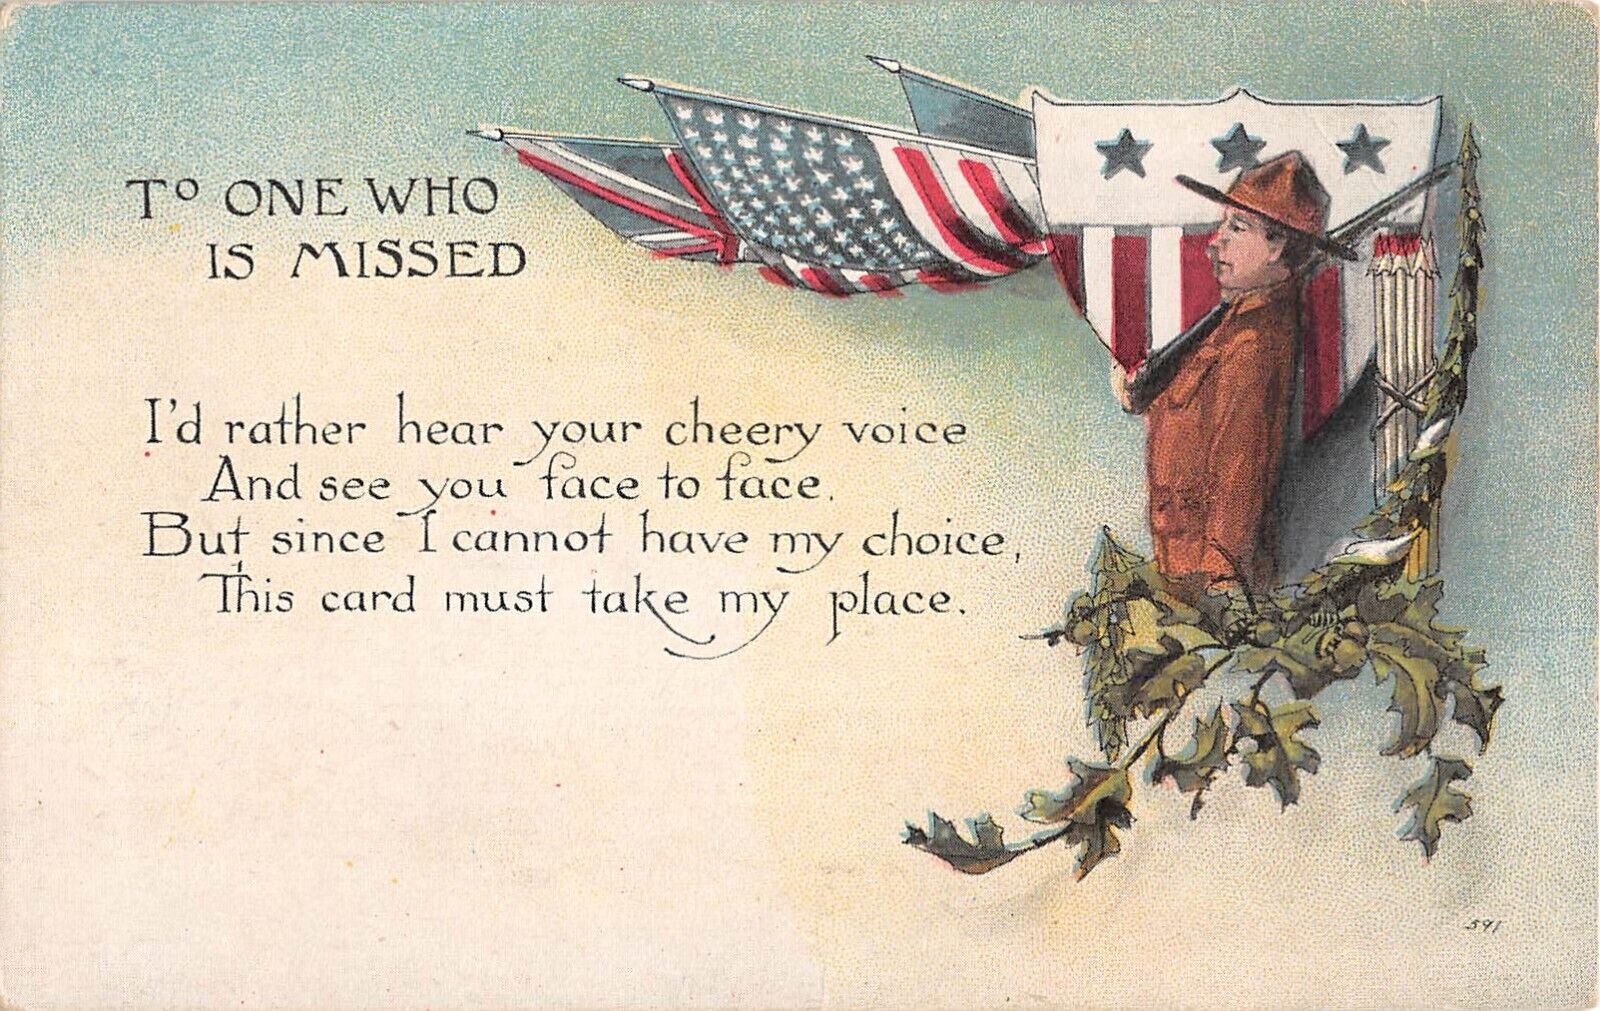 1916 Patriotic Postcard of Soldier Standing By Flags - To One Who Is Missed